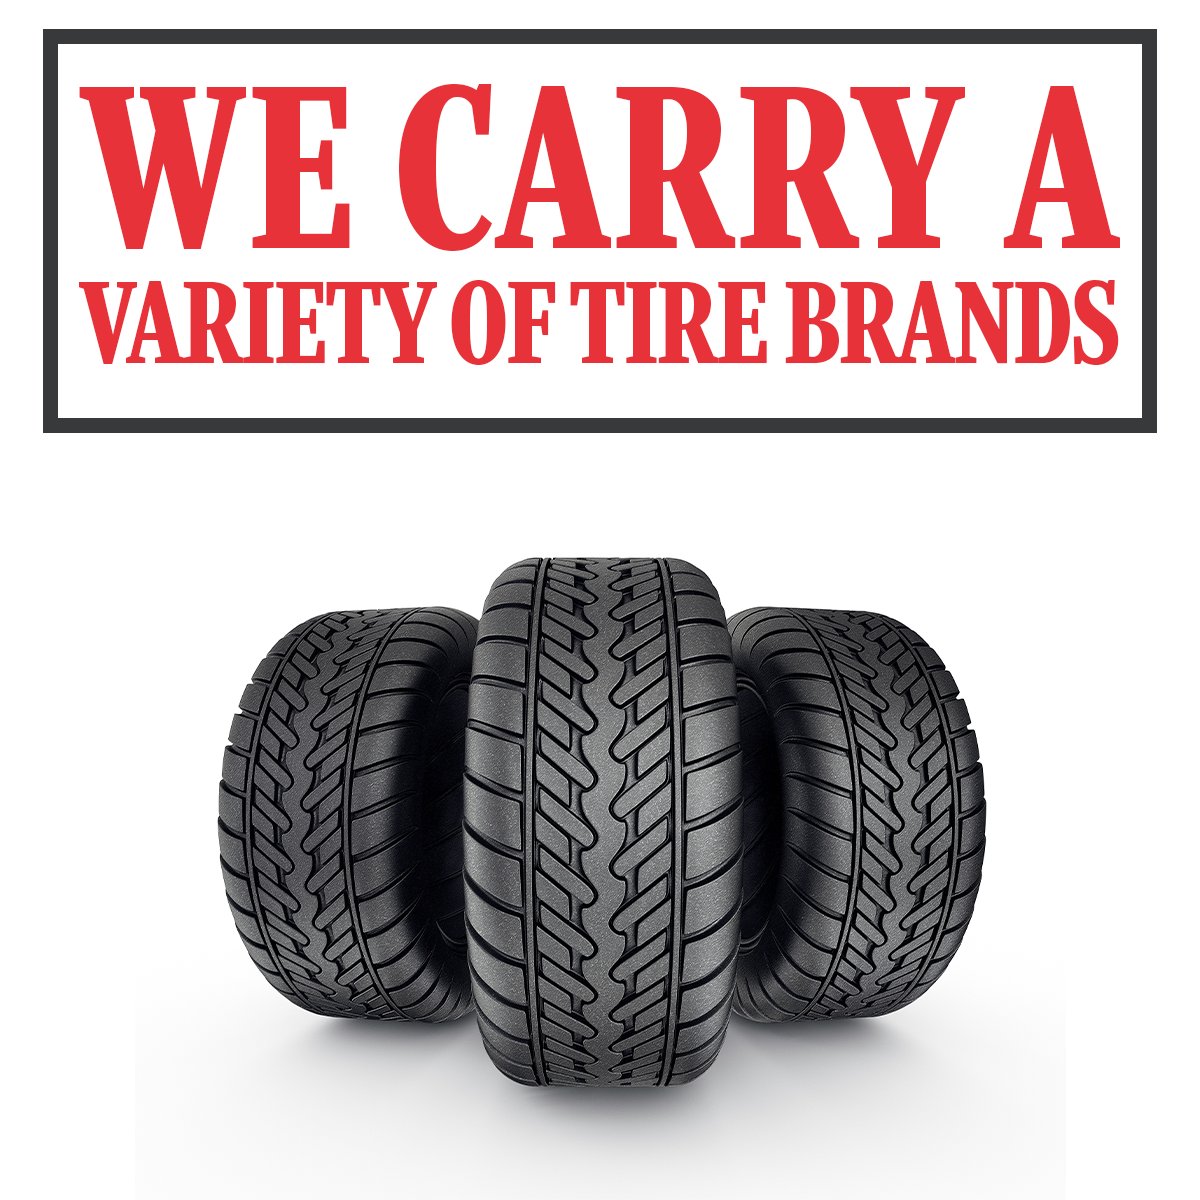 We carry the most trusted tire brands in the industry like Bridgestone, Firestone, Fuzion, Continental, General, Goodyear, Kelly, Dunlop, Hankook, Falken, Kumho, Toyo, Pirelli, Michelin, BFGoodrich, Uniroyal, and Vogue. gerrystires.com/shop-for-tires